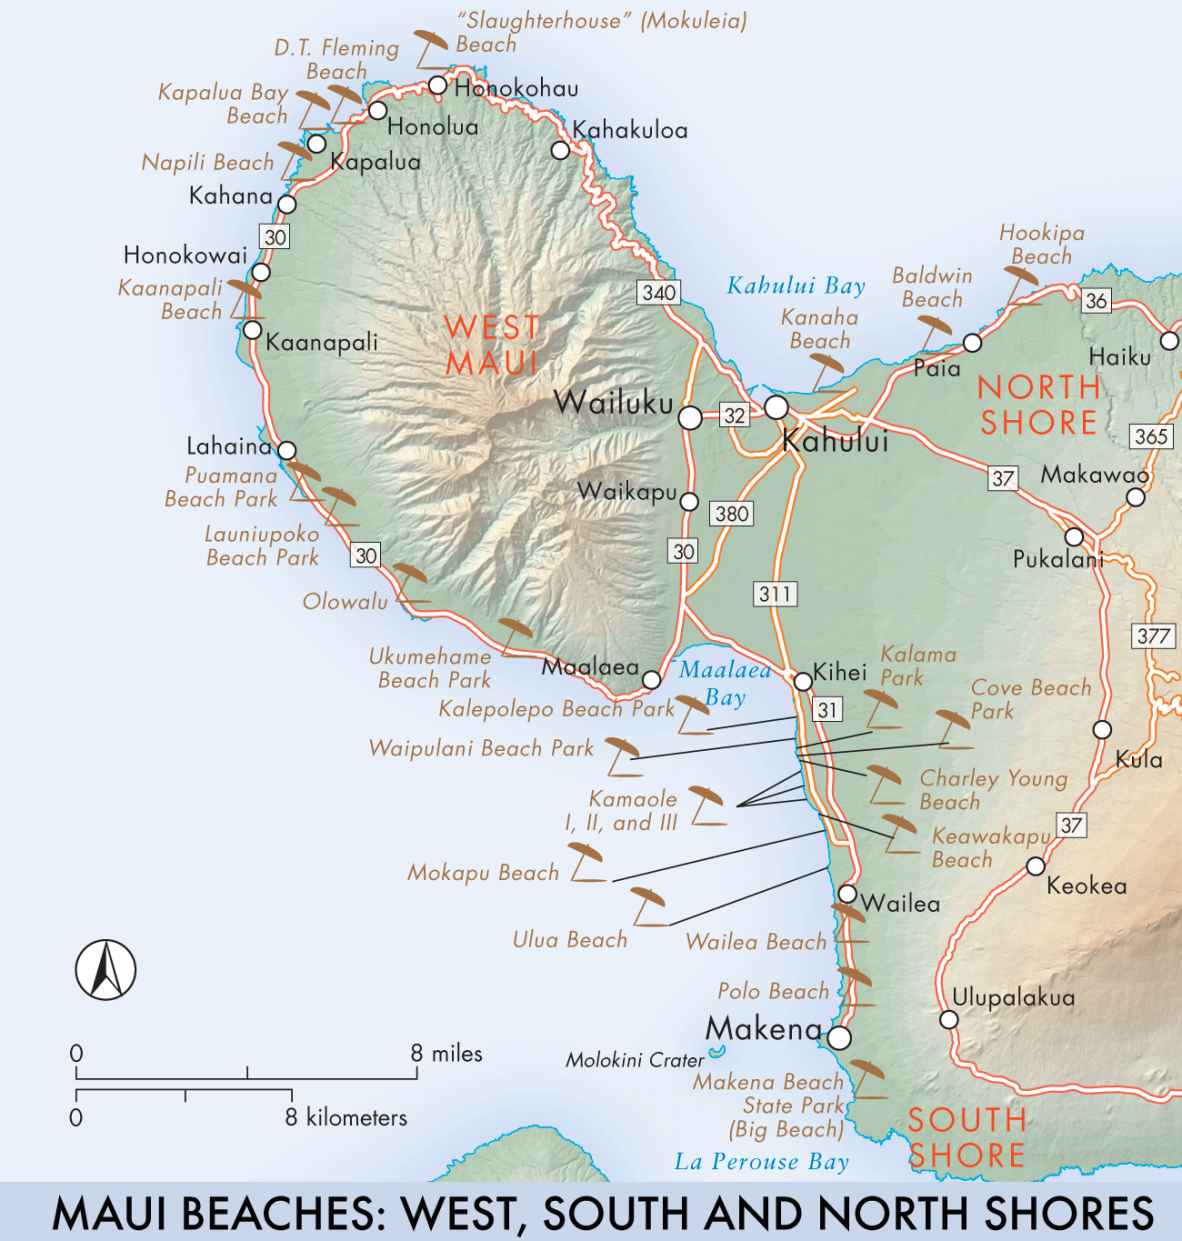 Maui Beaches: West, South and North Shores